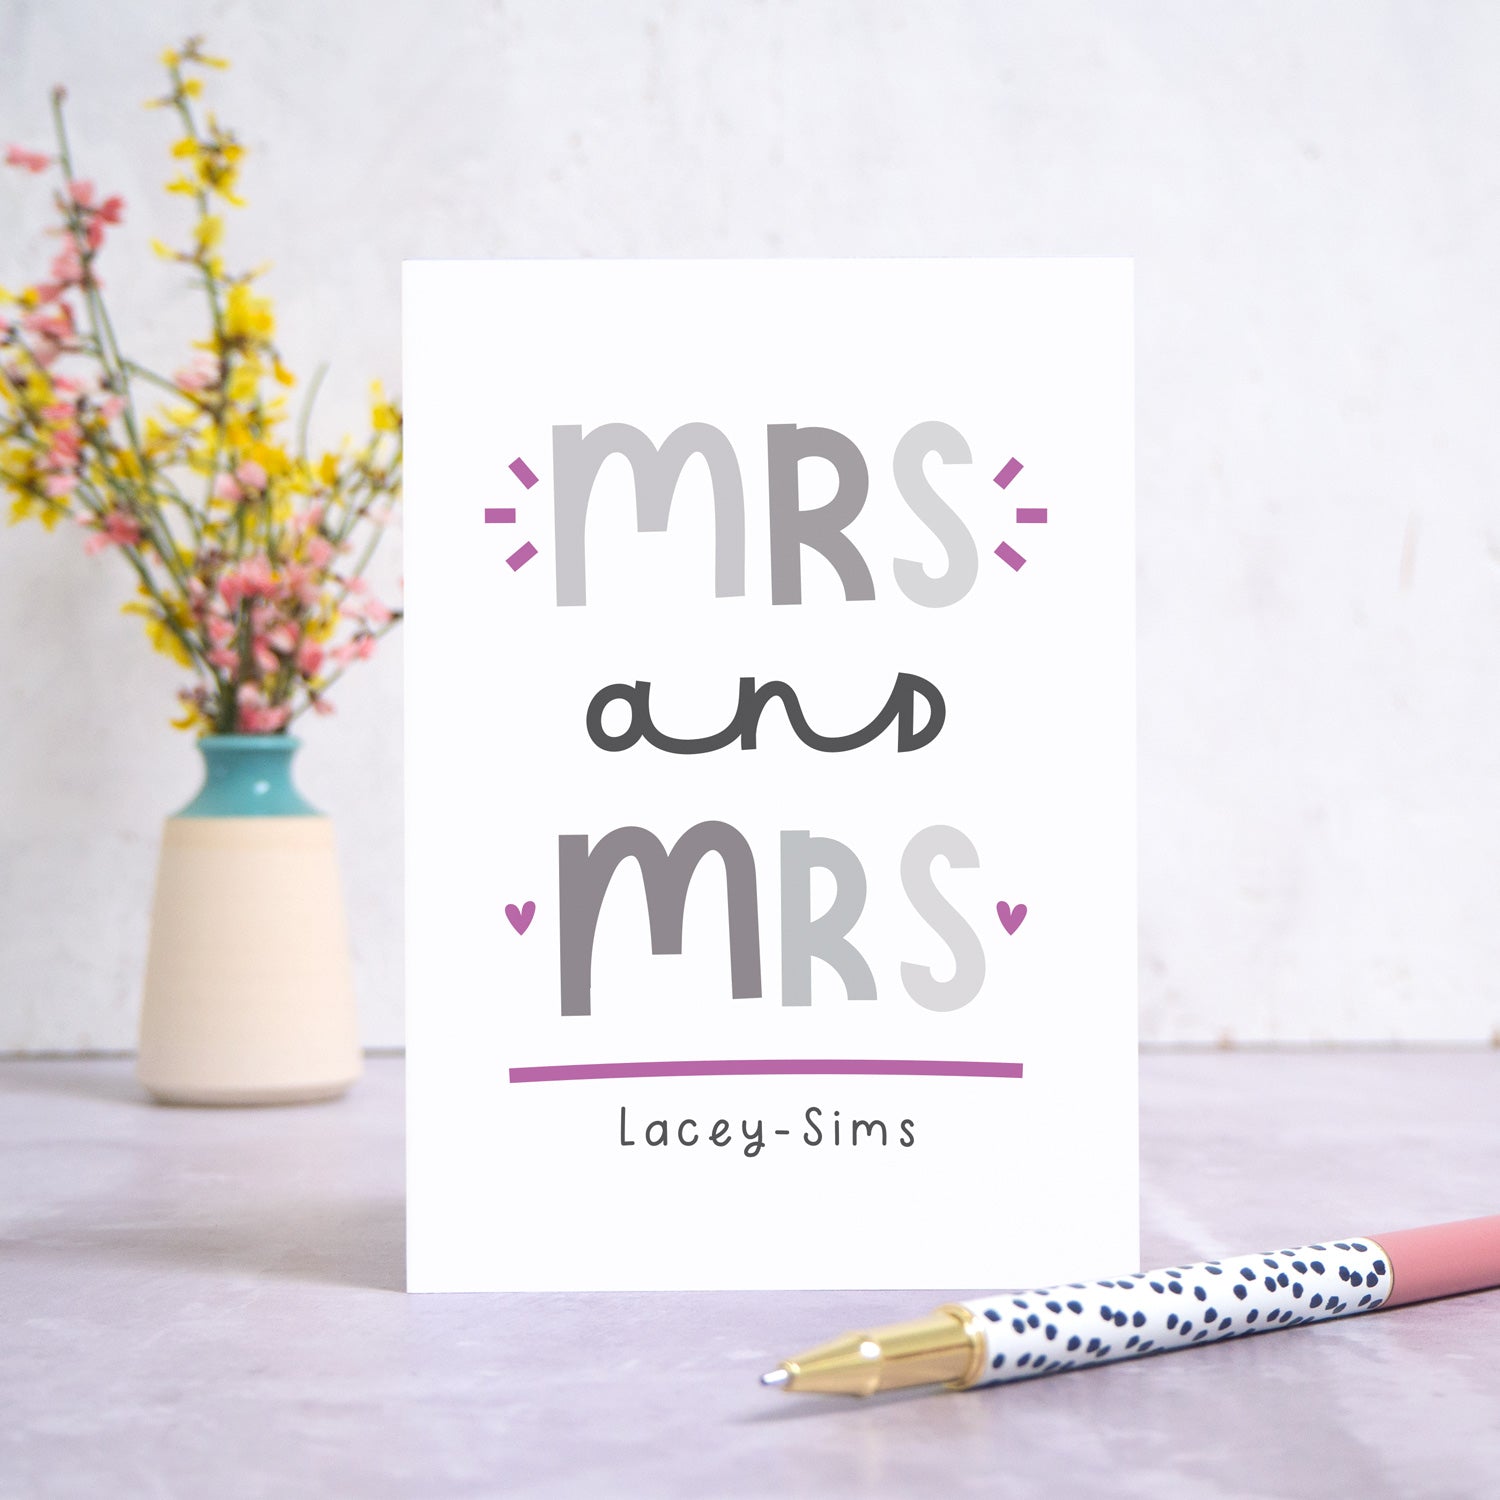 A Mrs and Mrs personalised wedding congratulations card stood in front of a white background and a small vase of yellow and pink flowers. There is a white and black spotty pen in the foreground. This is the grey and purple version of the card.